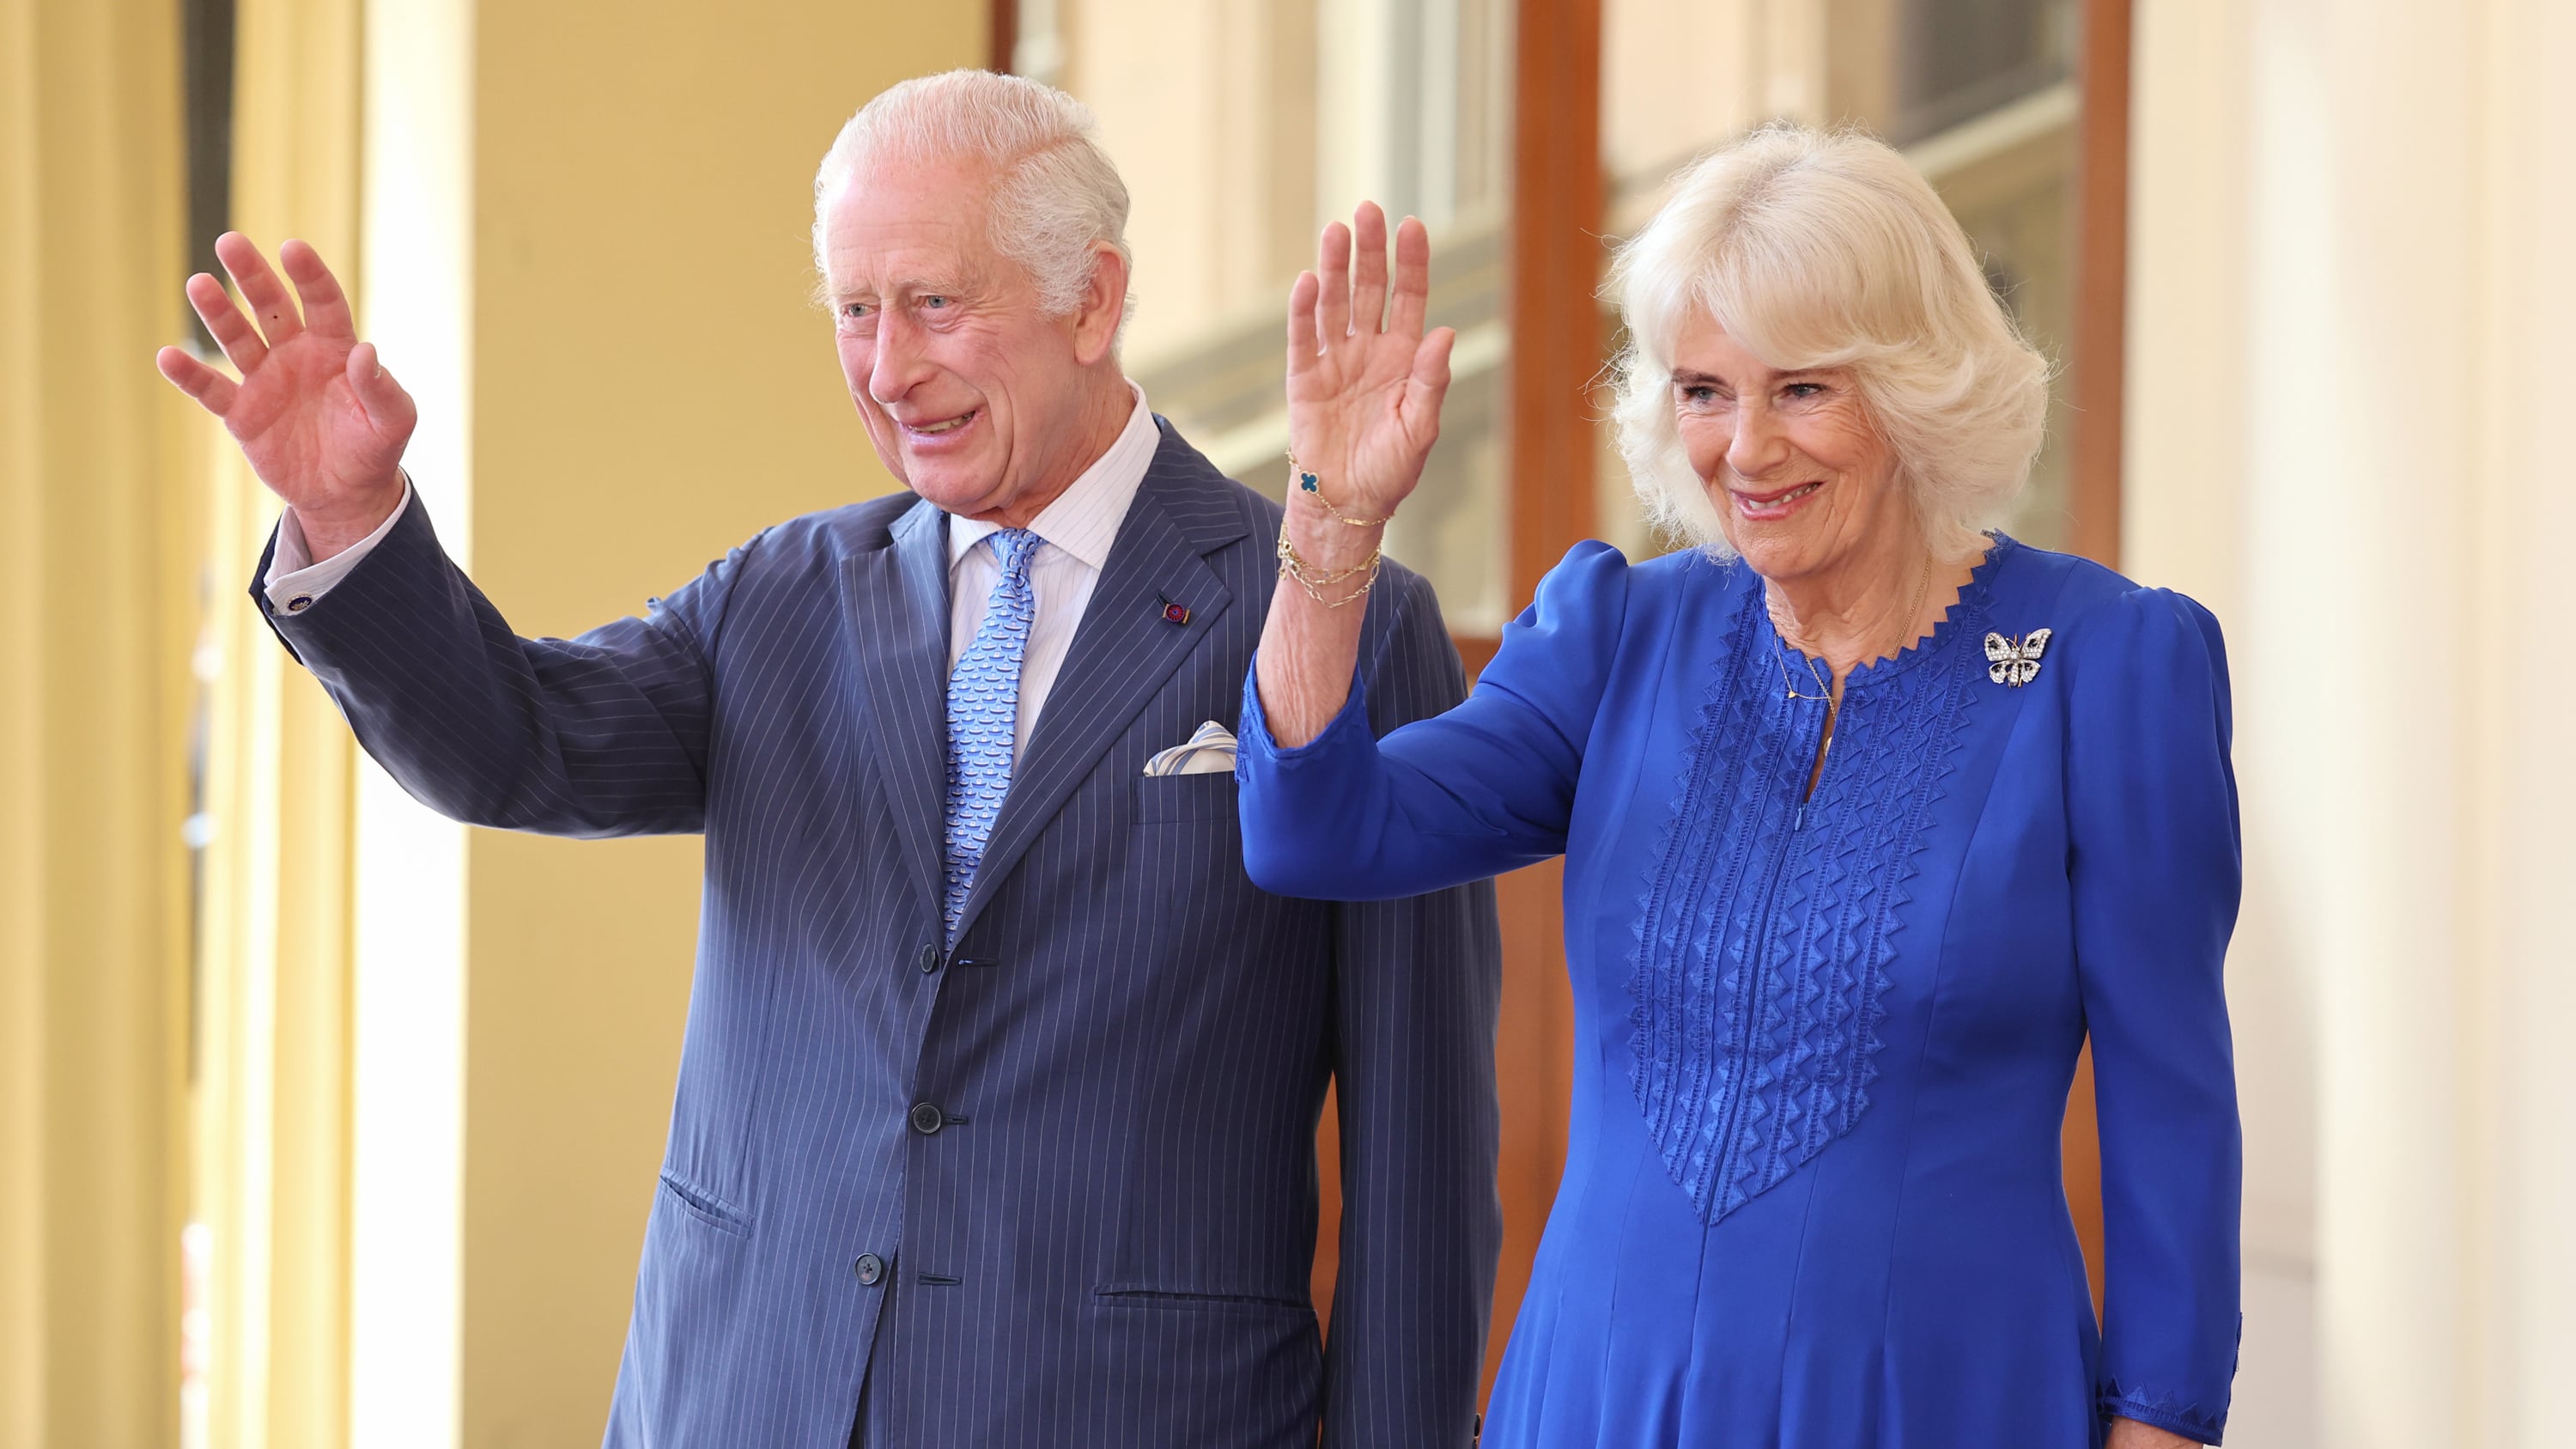 King Charles III and Queen Camilla wave and smile as they formally bid farewell to Emperor Naruhito and his wife Empress Masako of Japan as they leave Buckingham Palace, on the final day of their state visit to the UK